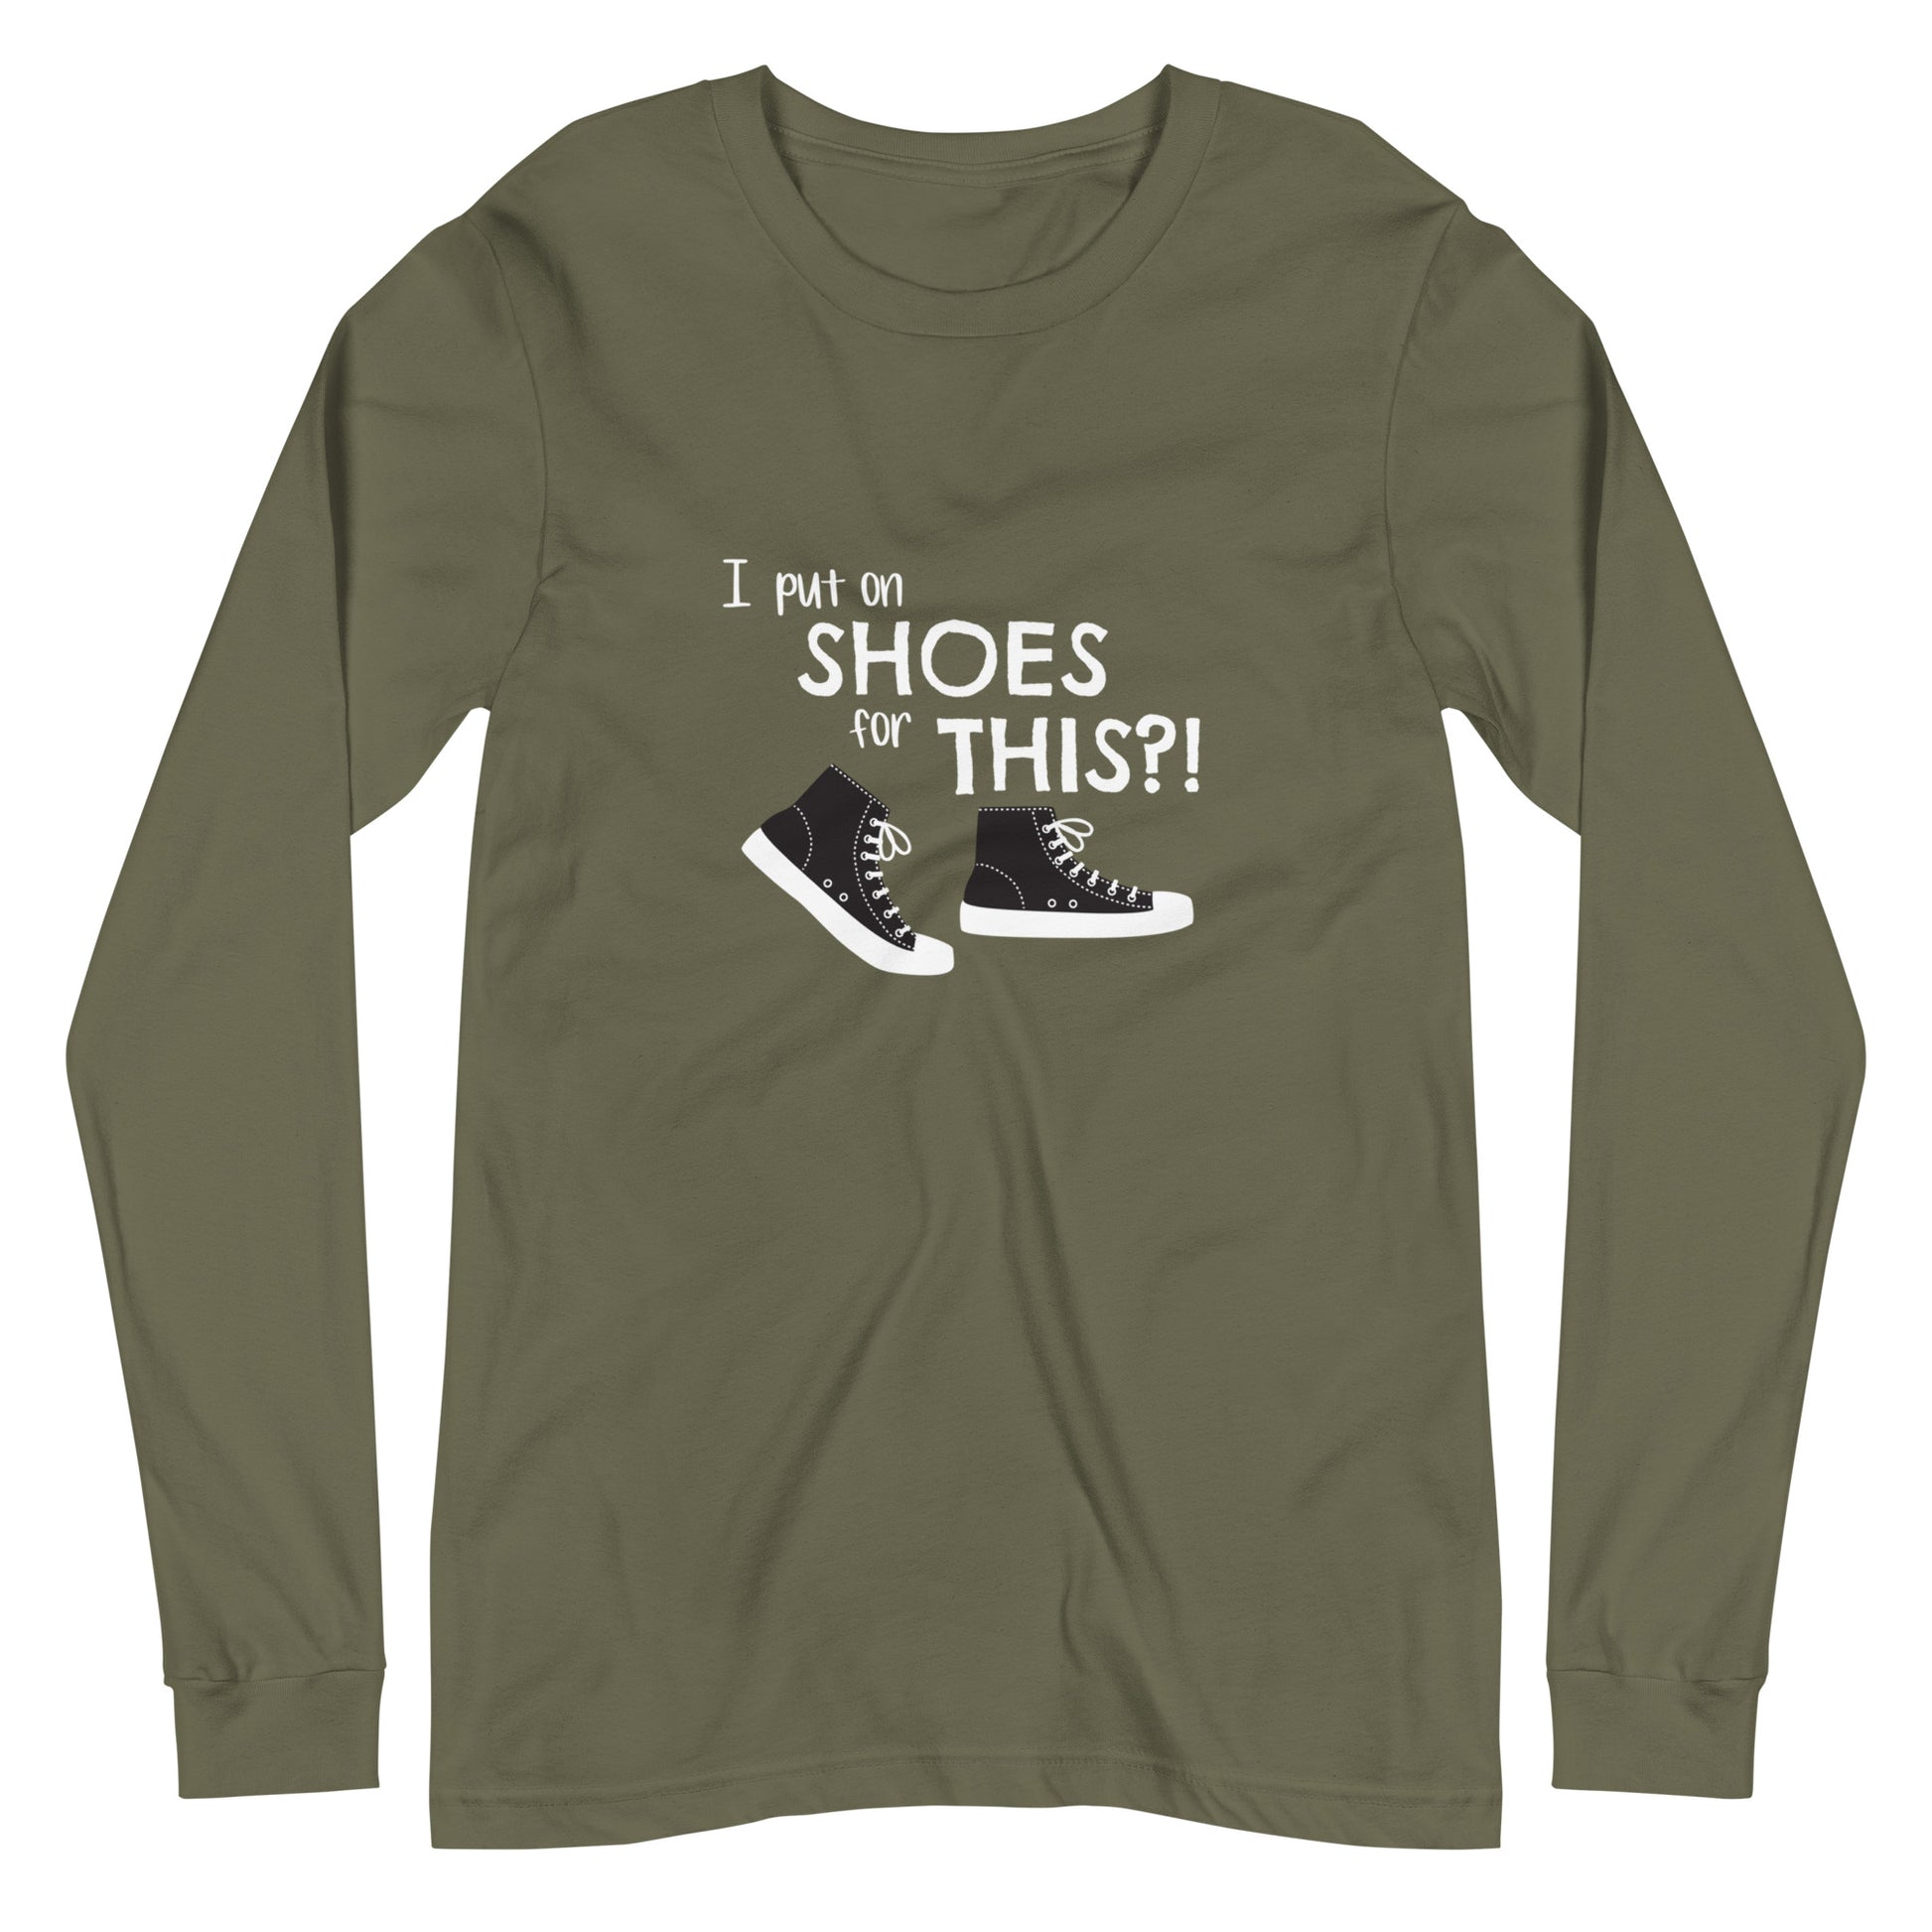 Military Green (olive tan) long-sleeve t-shirt with graphic of black and white canvas "chuck" sneakers and text: "I put on SHOES for THIS?!"